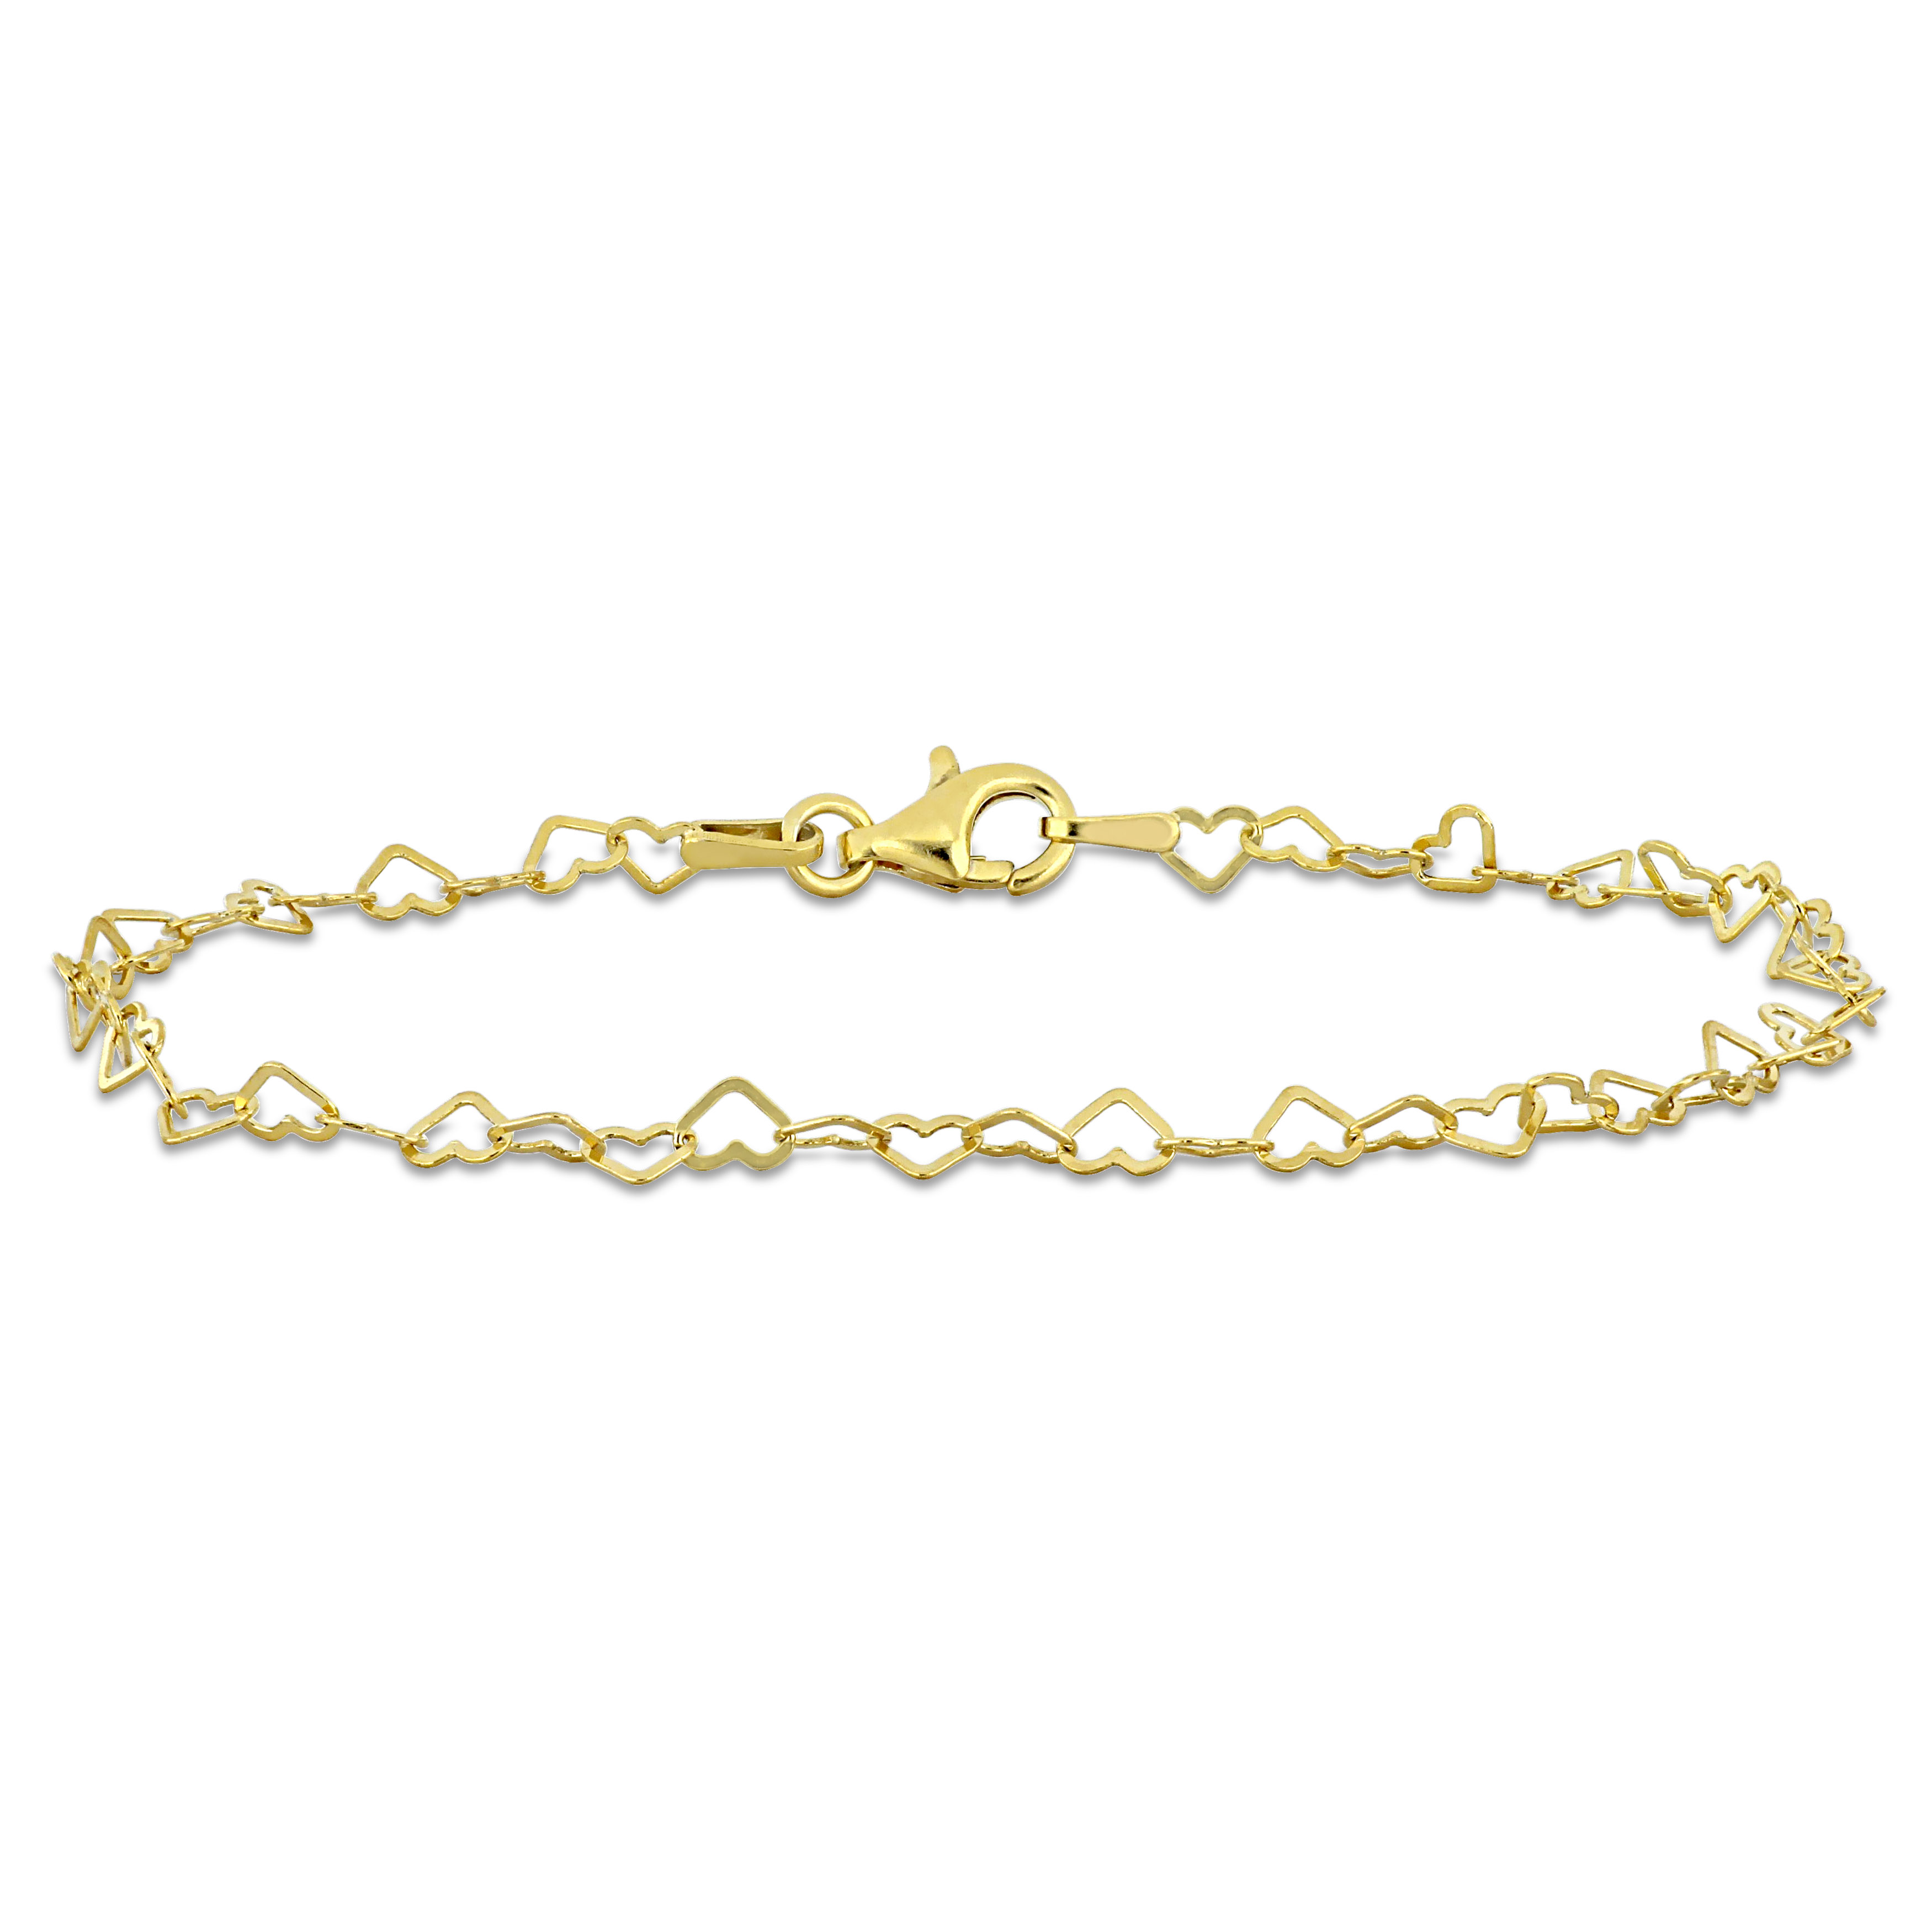 3mm Heart Link Bracelet with Lobster Clasp in Yellow Plated Sterling Silver - 7.5 in.